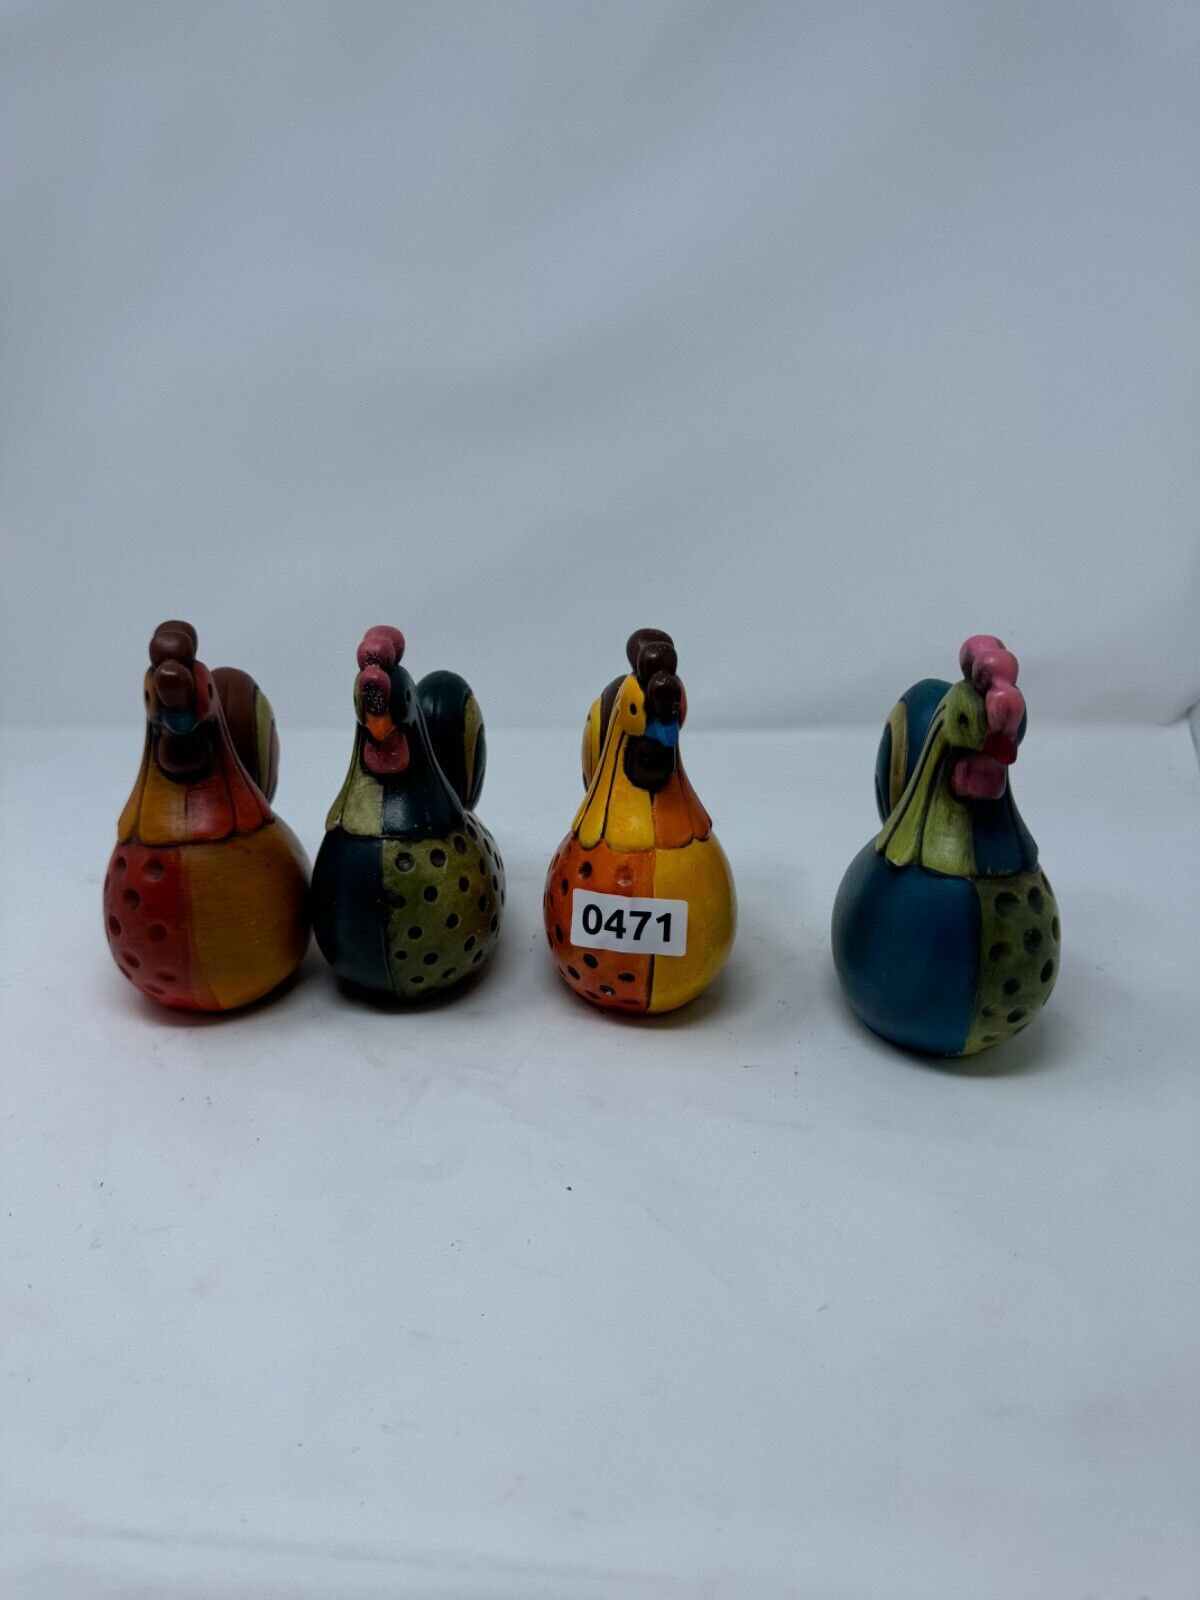 Vintage Ardco Painted Ceramic Rooster Figurines Rustic Farmhouse Decor Set Of 4